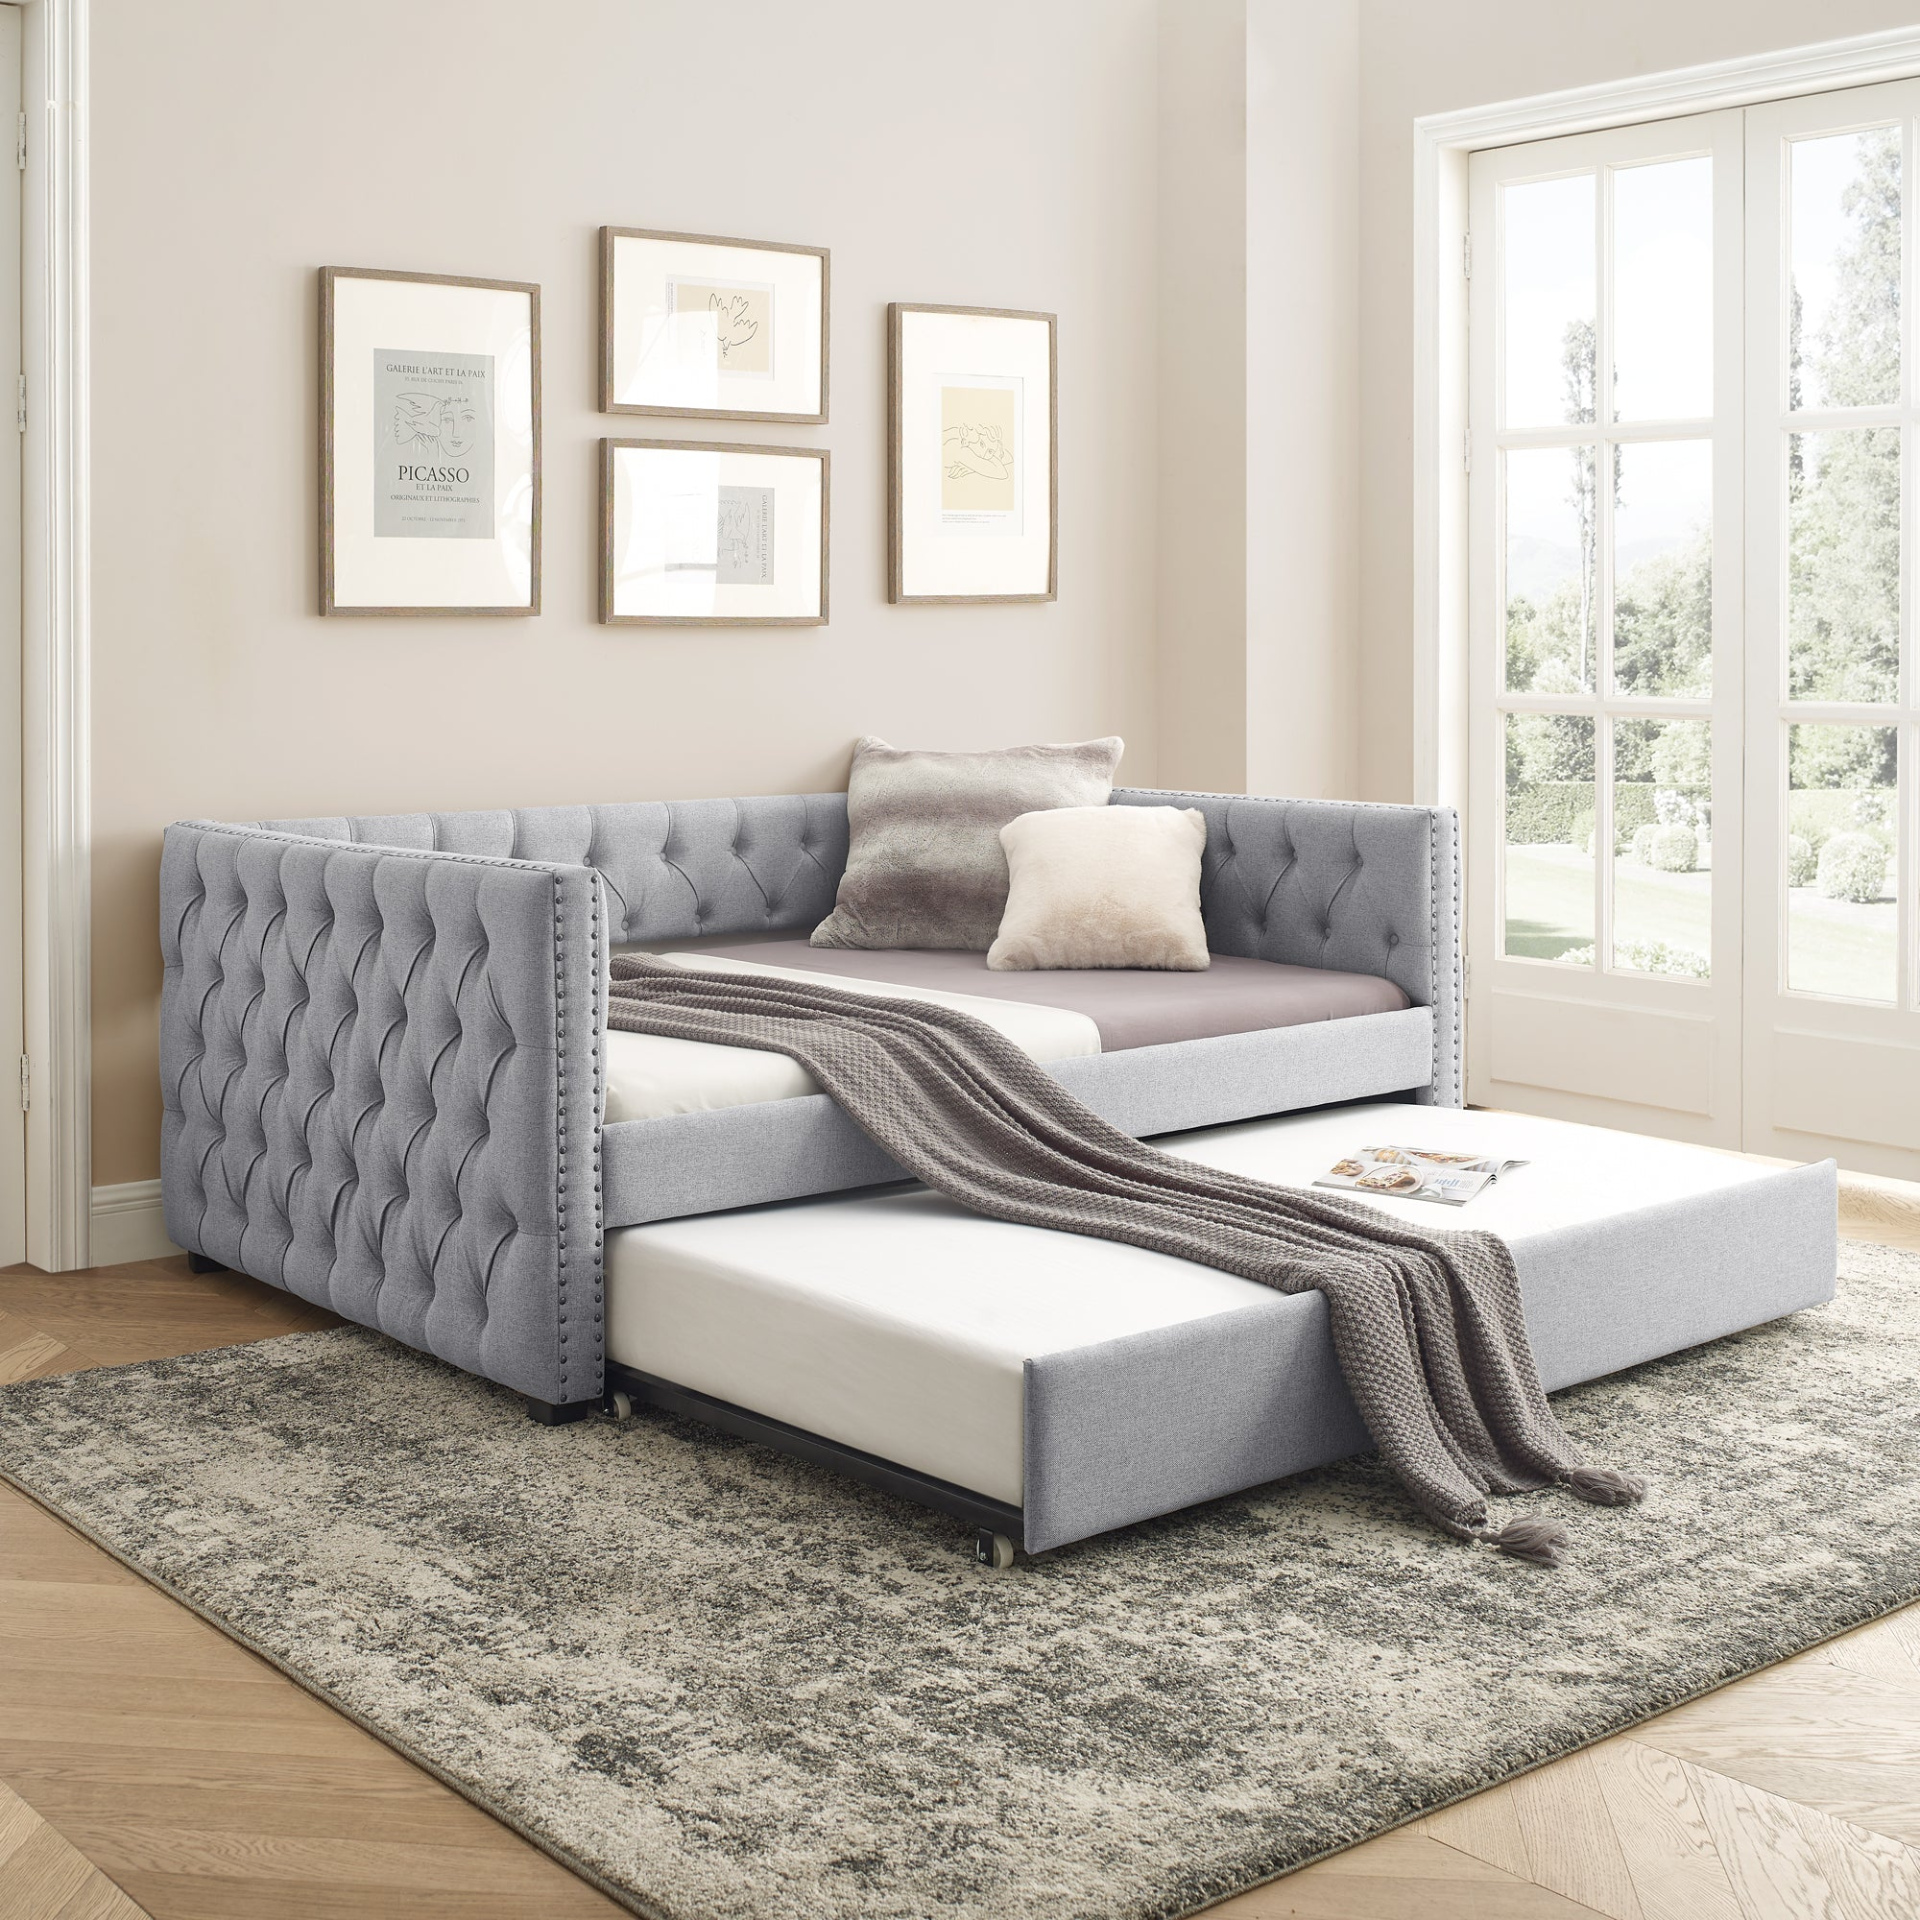 Grey - Button Tufted Daybed Sofa with Pull-Out Trundle - Full Size Daybed & Twin Trundle (85"x57"x31.5")